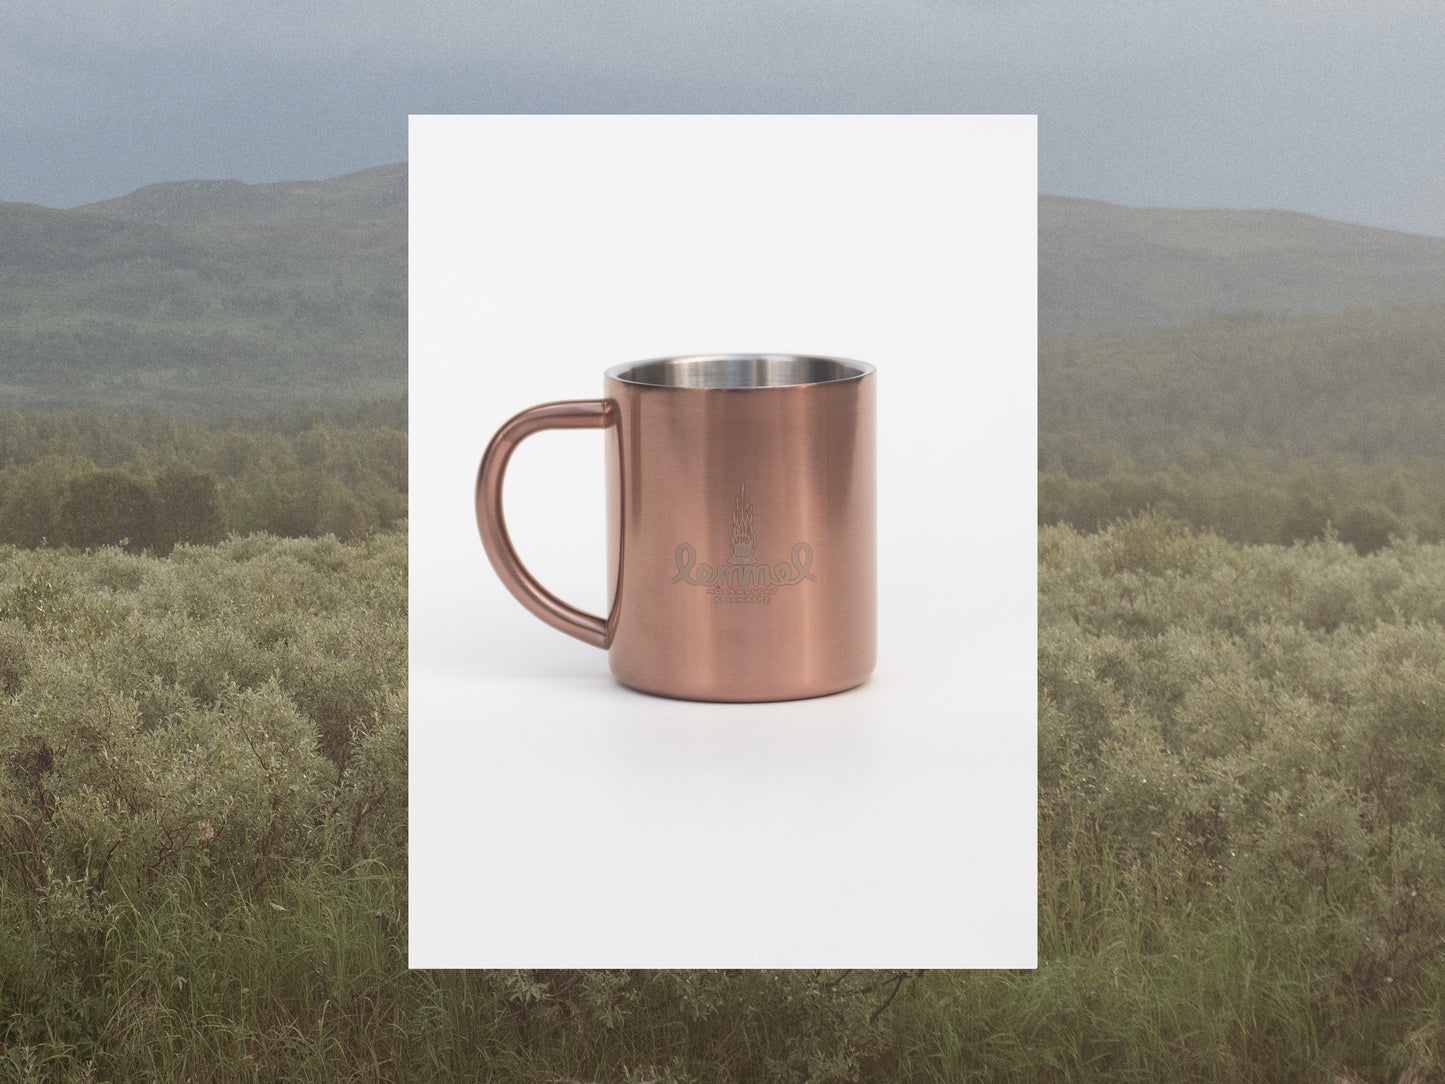 stainless cup "Palindromet"